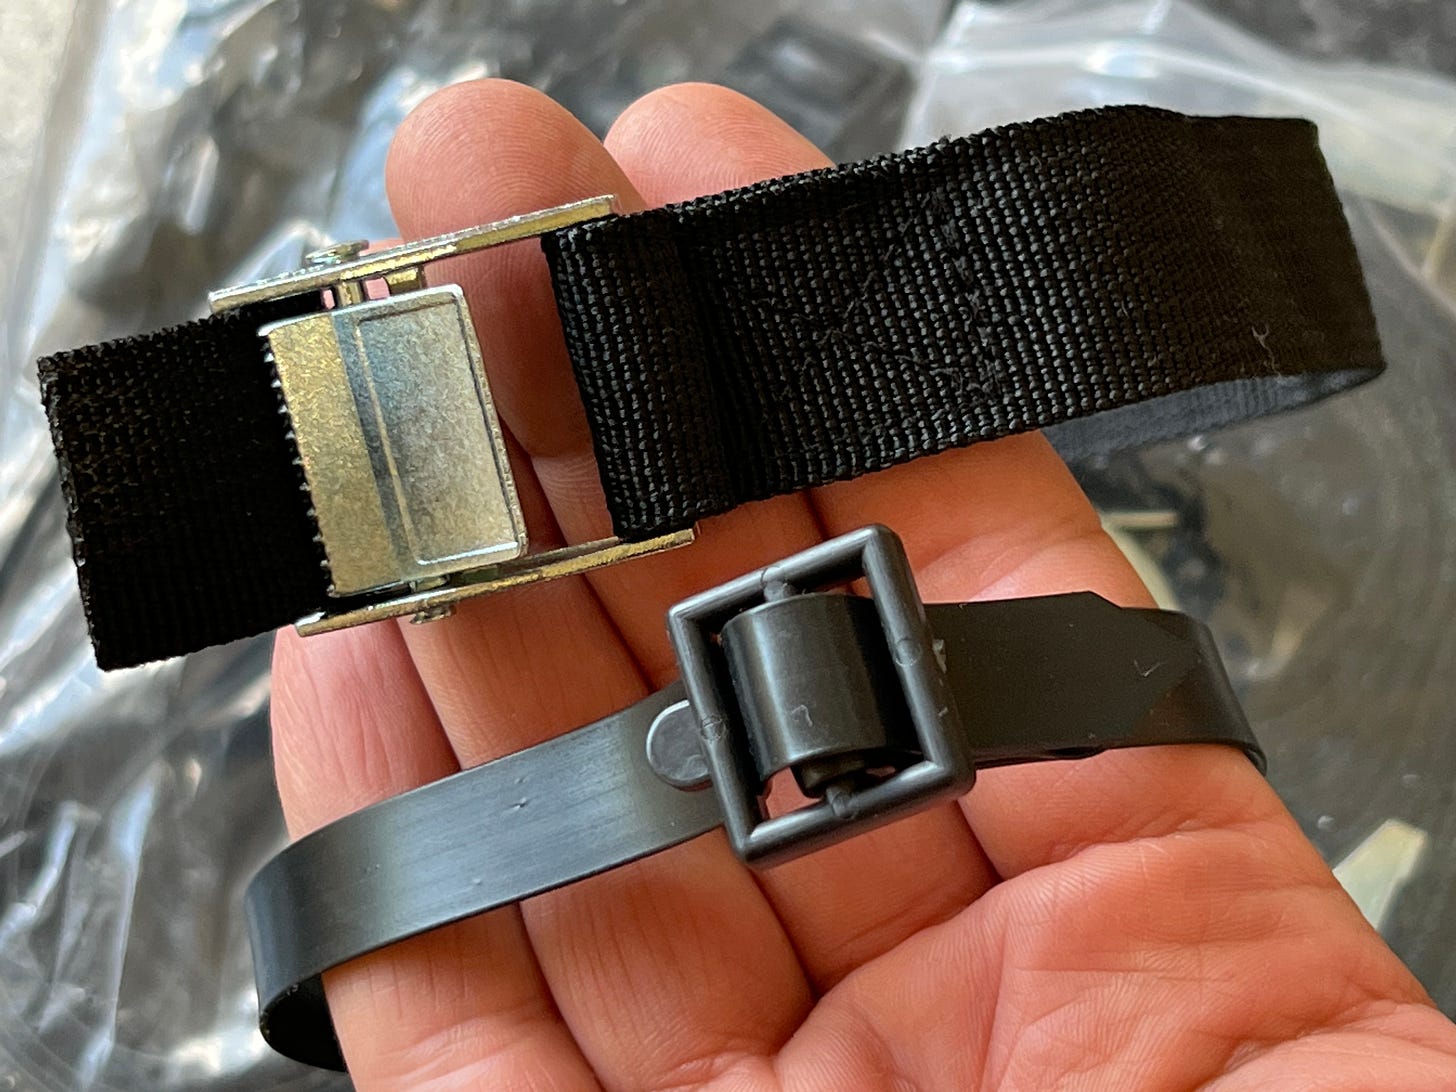 two types of straps are shown in a hand